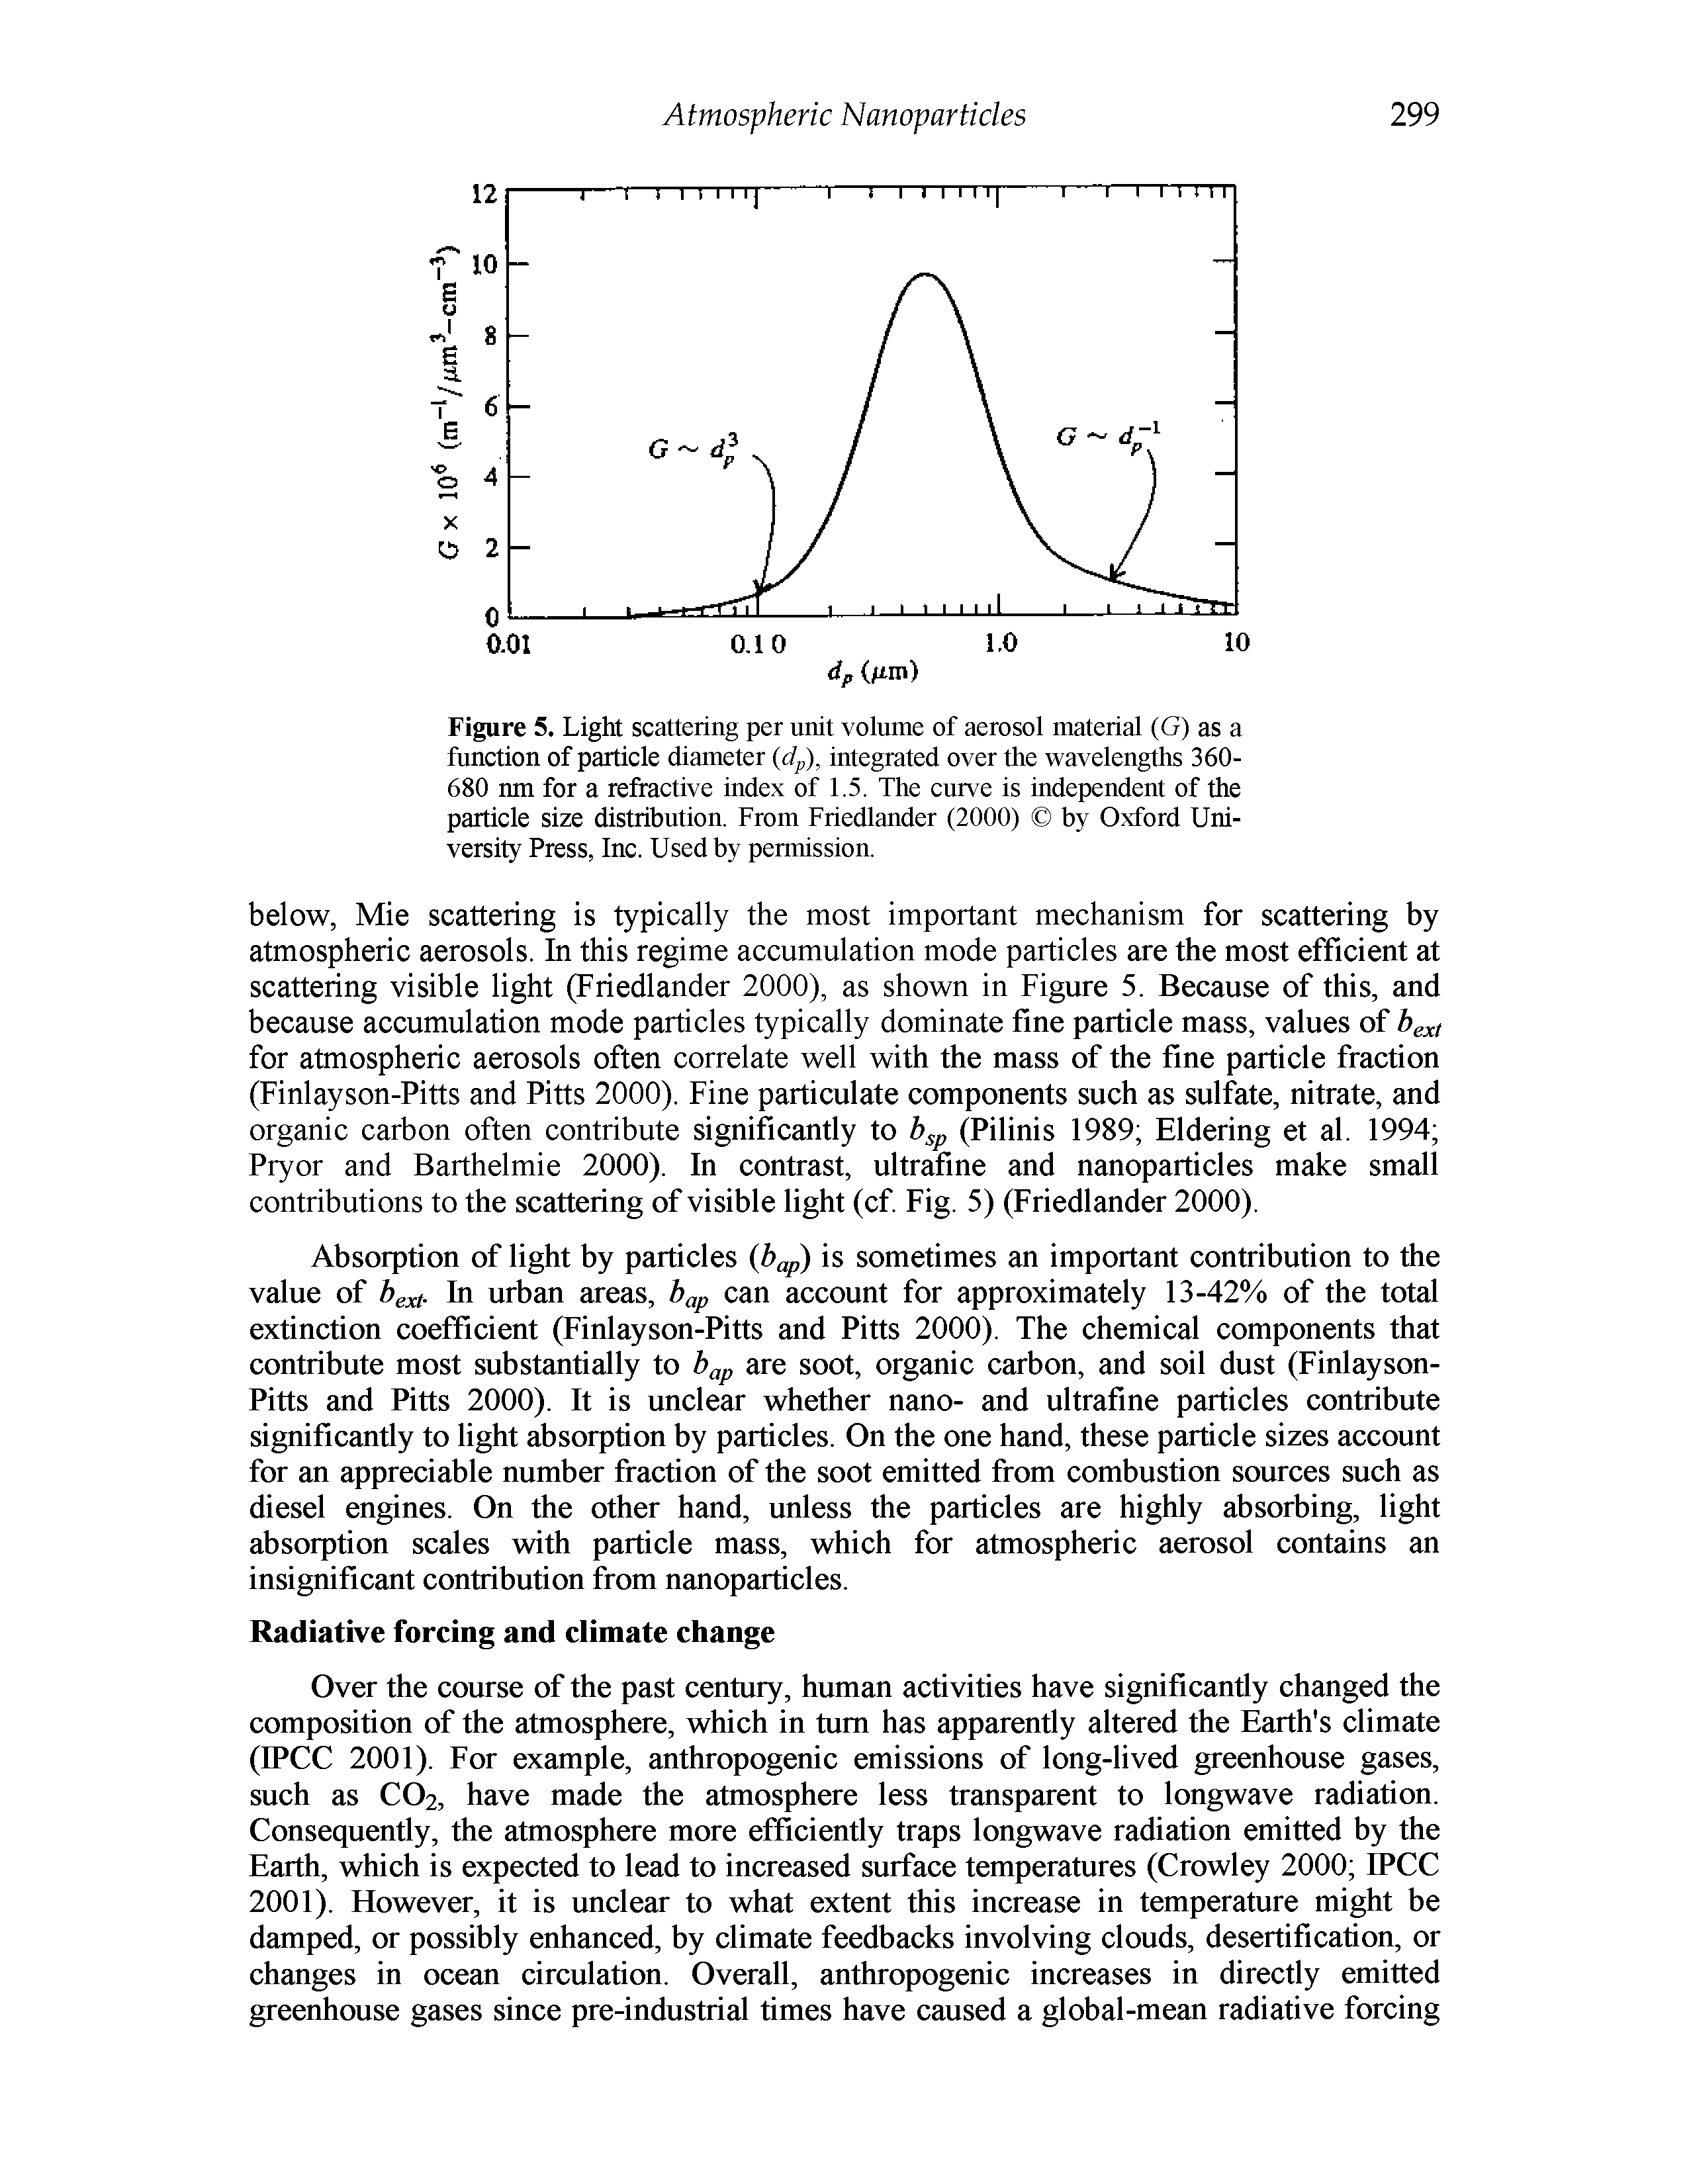 Figure 5. Light scattering per unit volume of aerosol material (G) as a function of particle diameter (dp), integrated over the wavelengths 360-680 nm for a refractive index of 1.5. The curve is independent of the particle size distribution. From Friedlander (2000) by Oxford University Press, Inc. Used by permission.